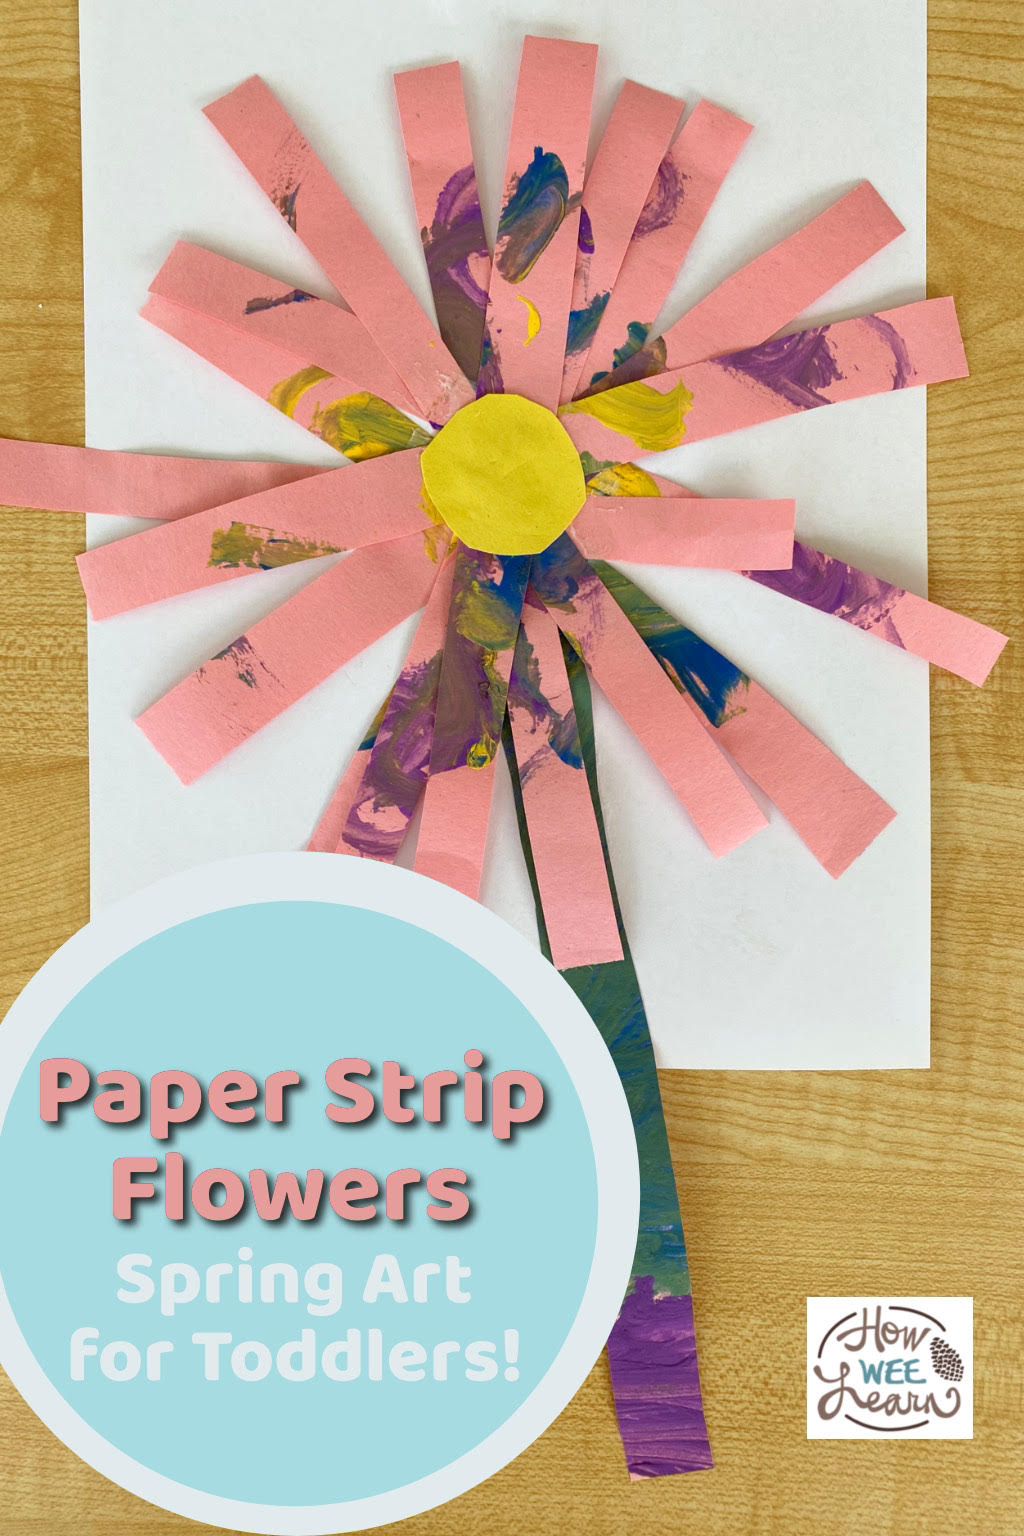 A Paper Strip Flower Craft for Toddlers (and big kids too!) - How